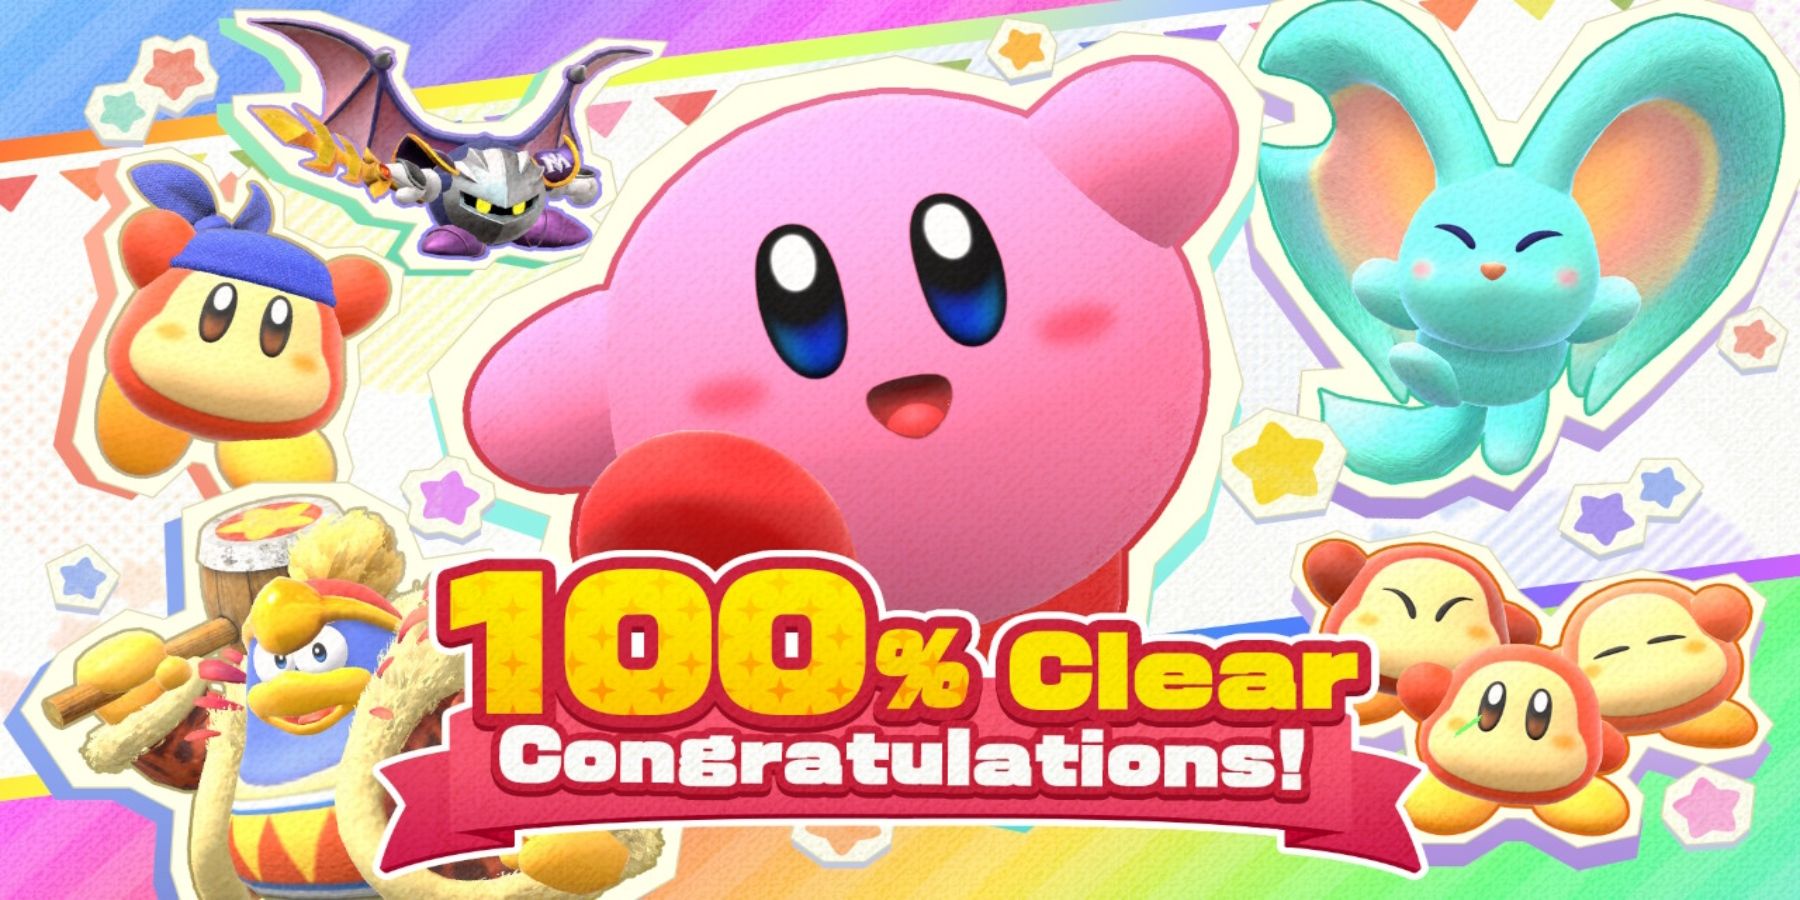 Every Blueprint Upgrade Location in Kirby And The Forgotten Land